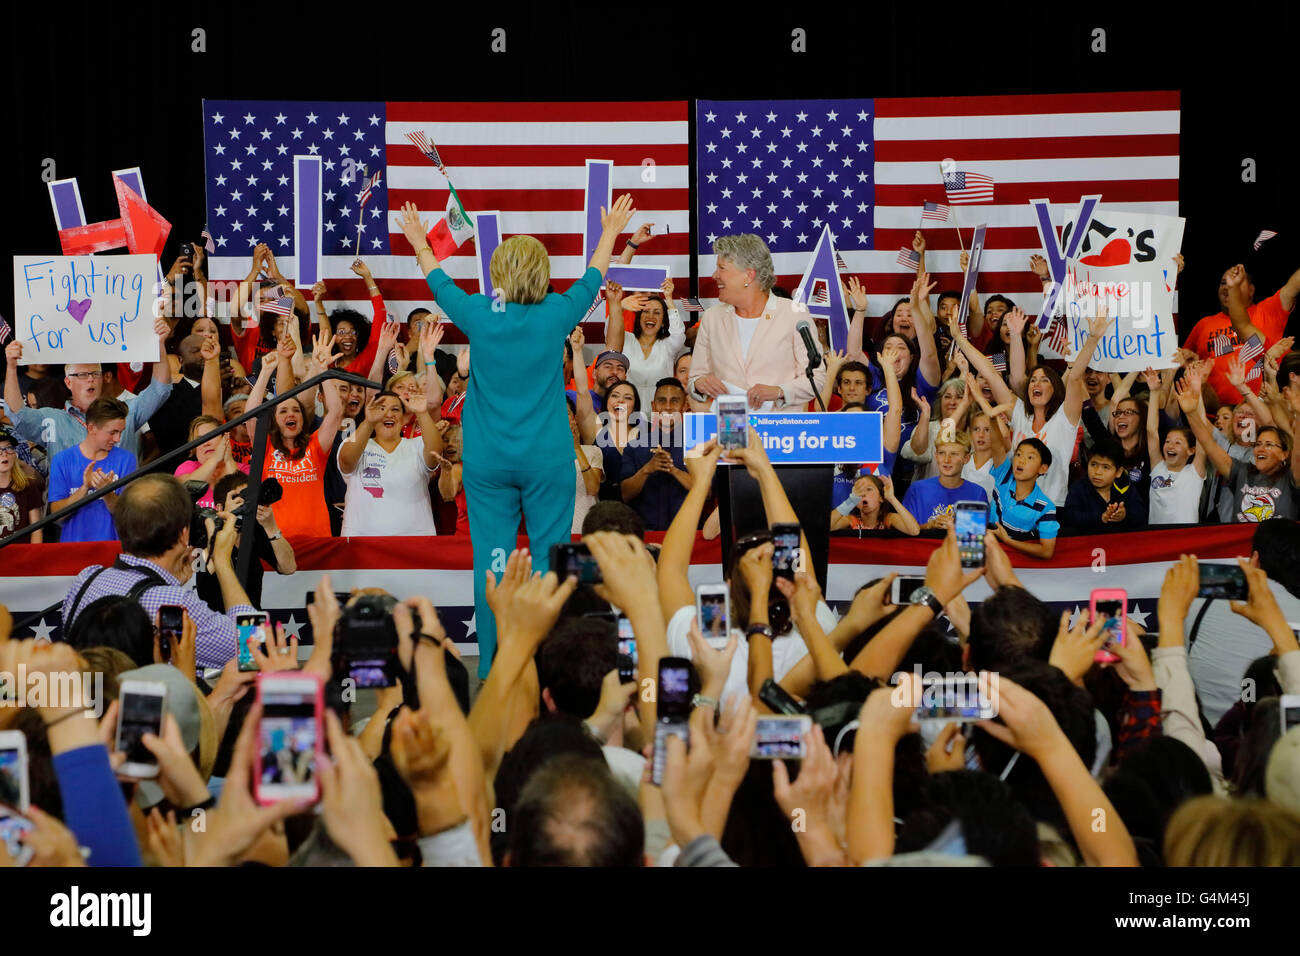 Presidential Candidate Hillary Clinton Campaigns in Oxnard, CA at "Get out the vote" rally Stock Photo